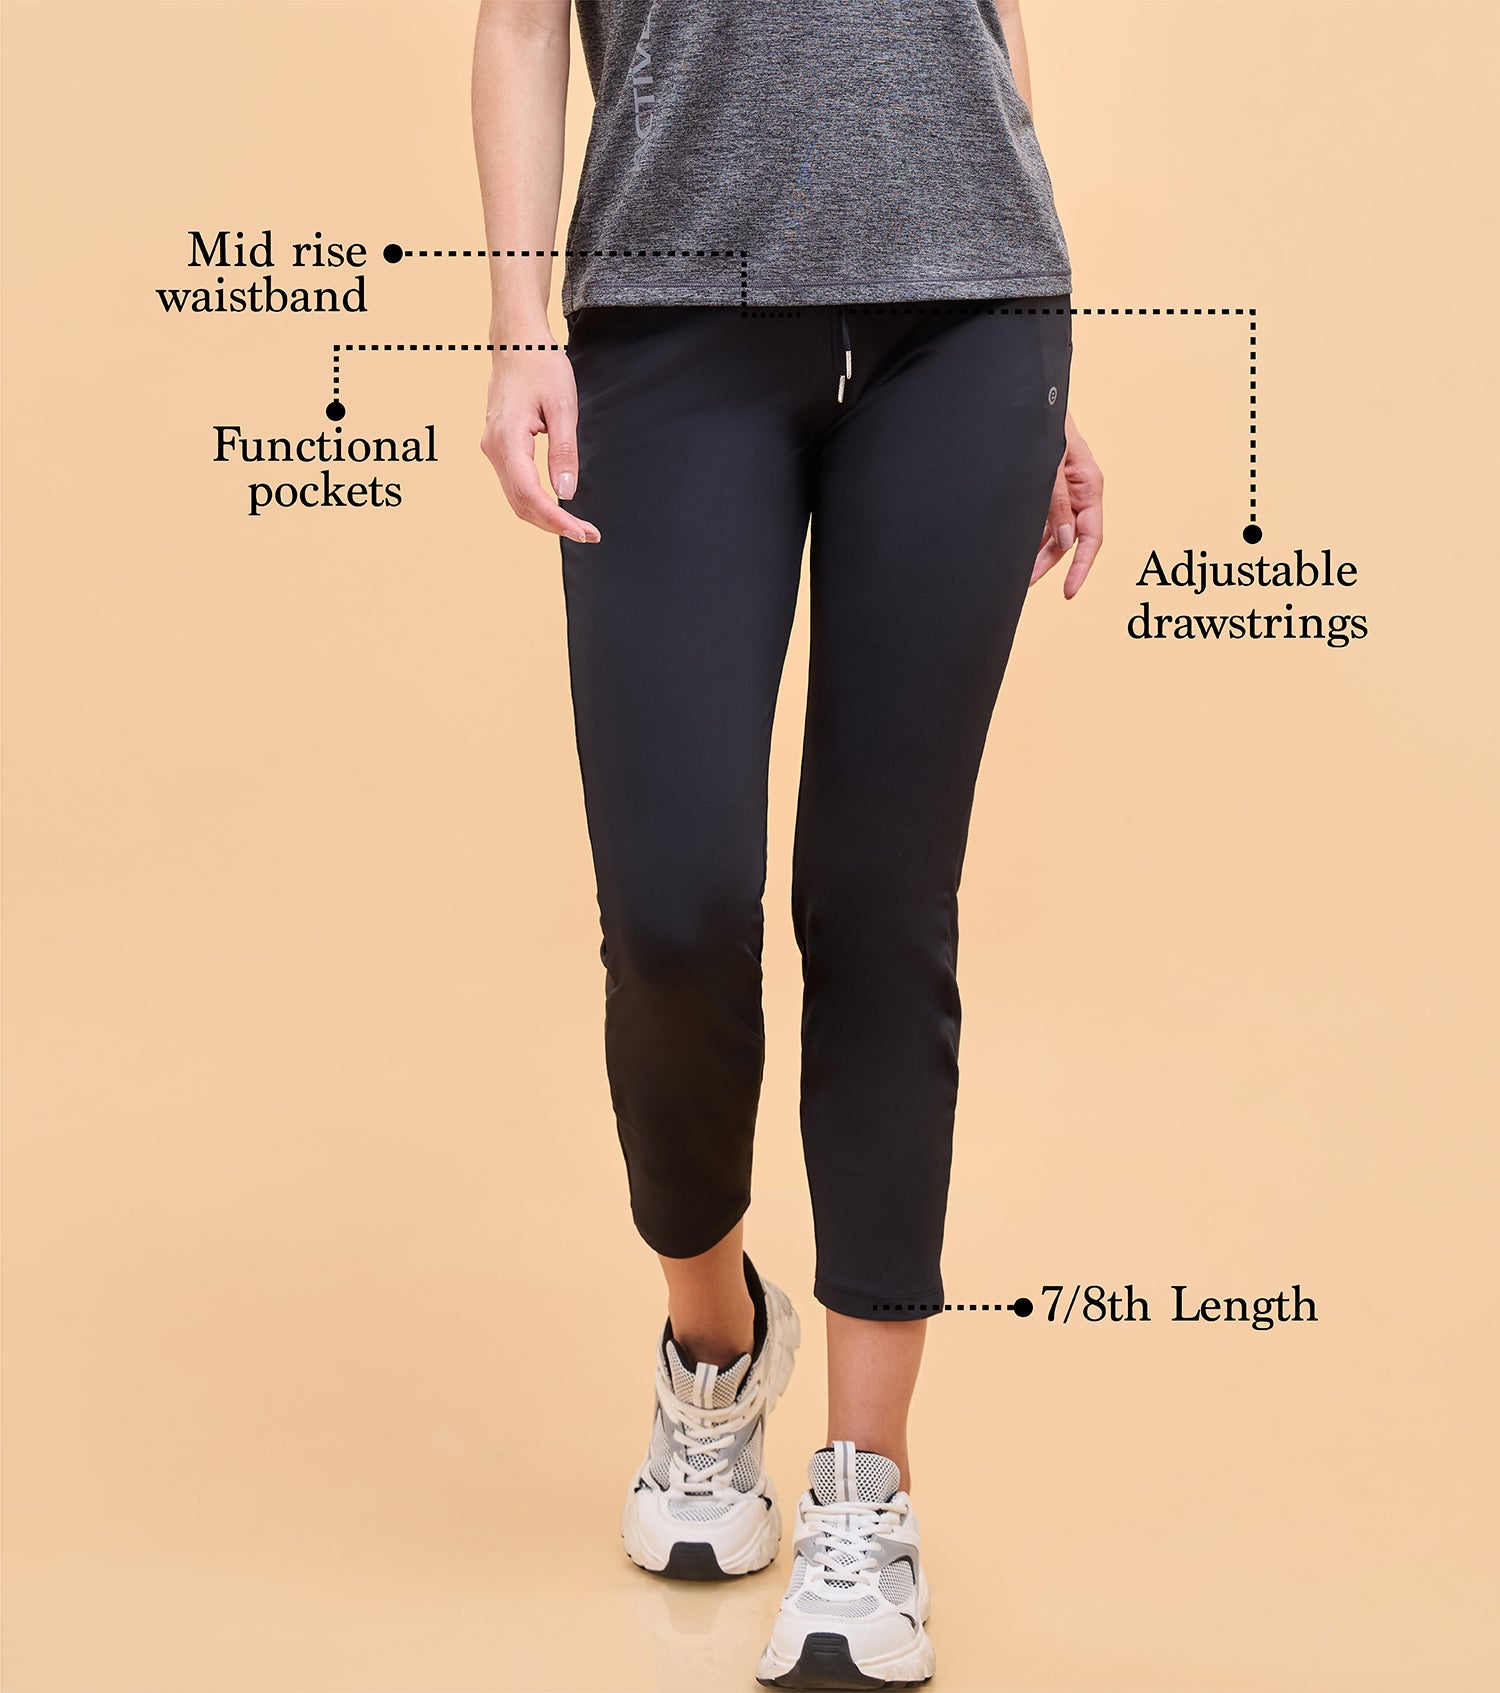 Enamor Athleisure Womens E068-Dry Fit Antimicrobial Mid Rise Smart Active Travel Pants